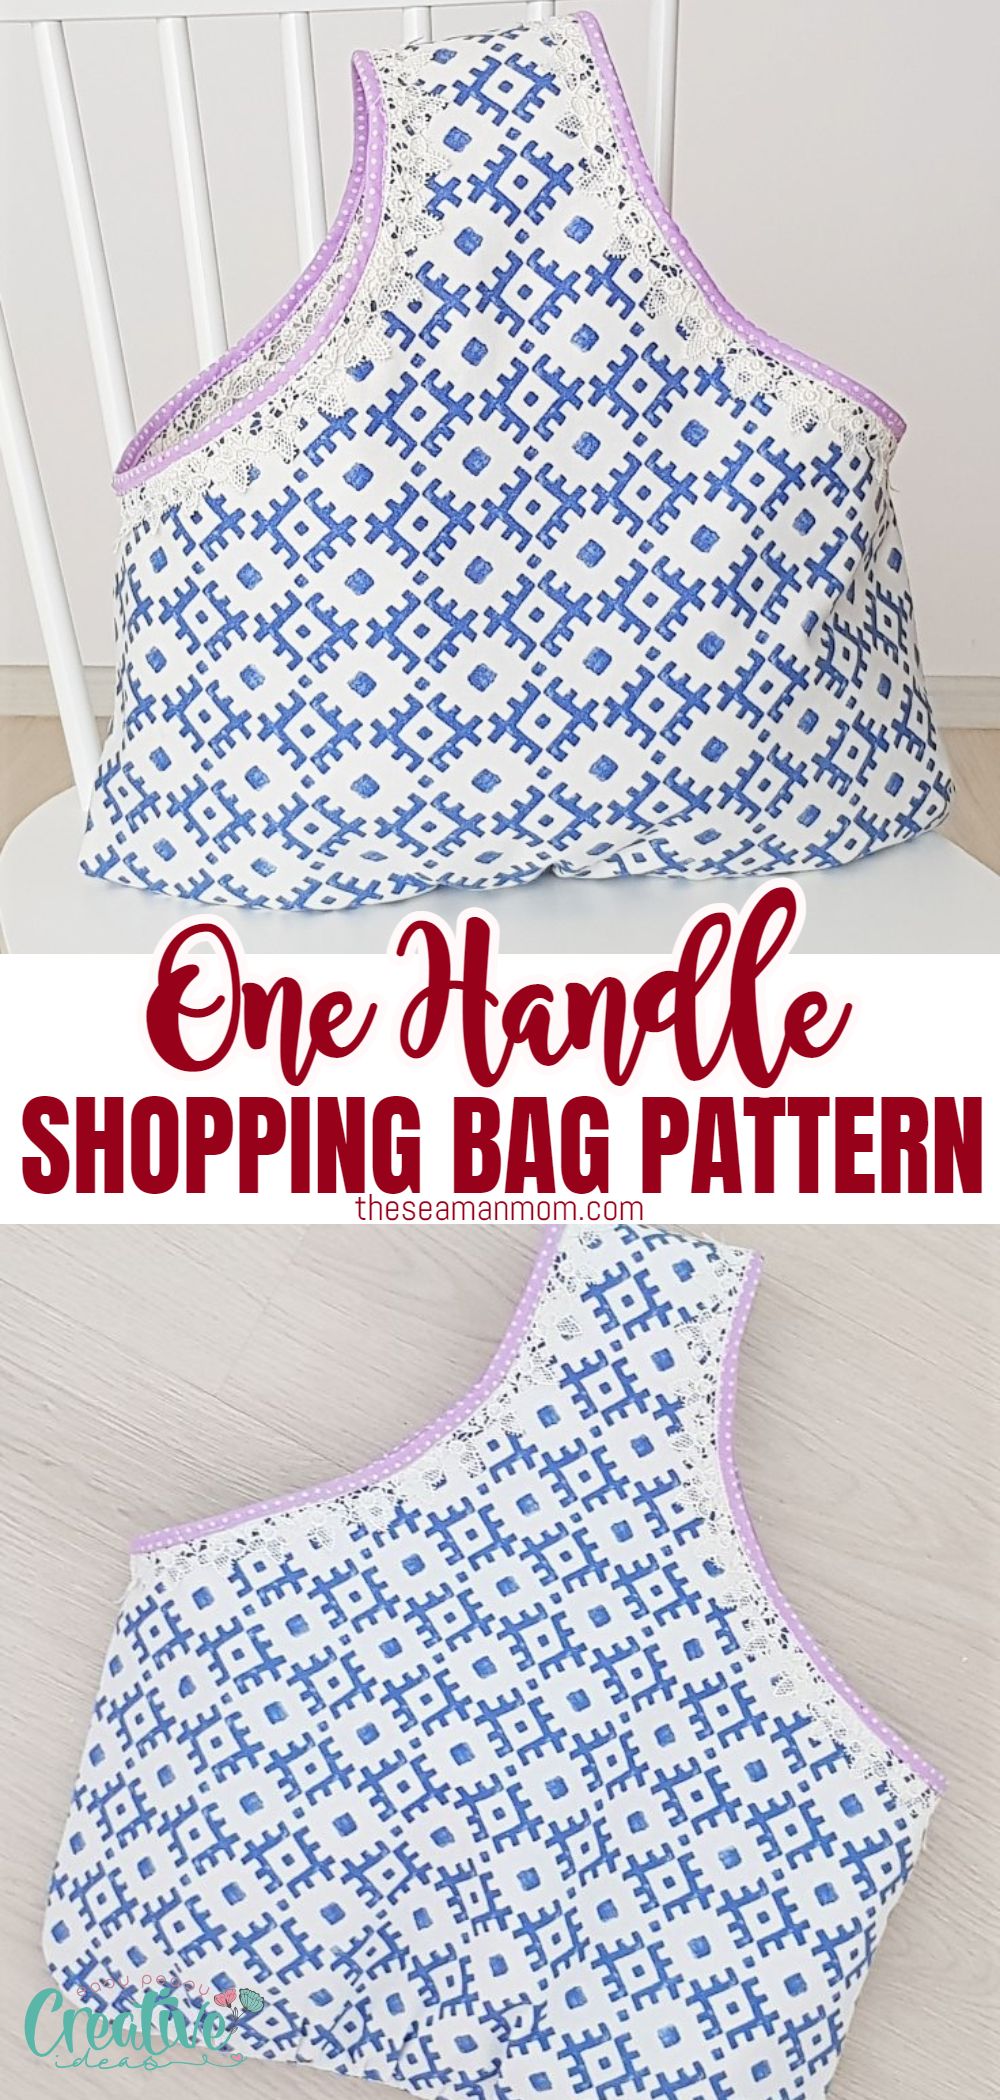 Visit the market or the mall in style when you make your own personalized fabric tote bag! This shopping bag pattern is pretty, functional and easy to use and comes together in no time! Great project for beginner sewists or someone who needs a quick fabric shopping bag! via @petroneagu